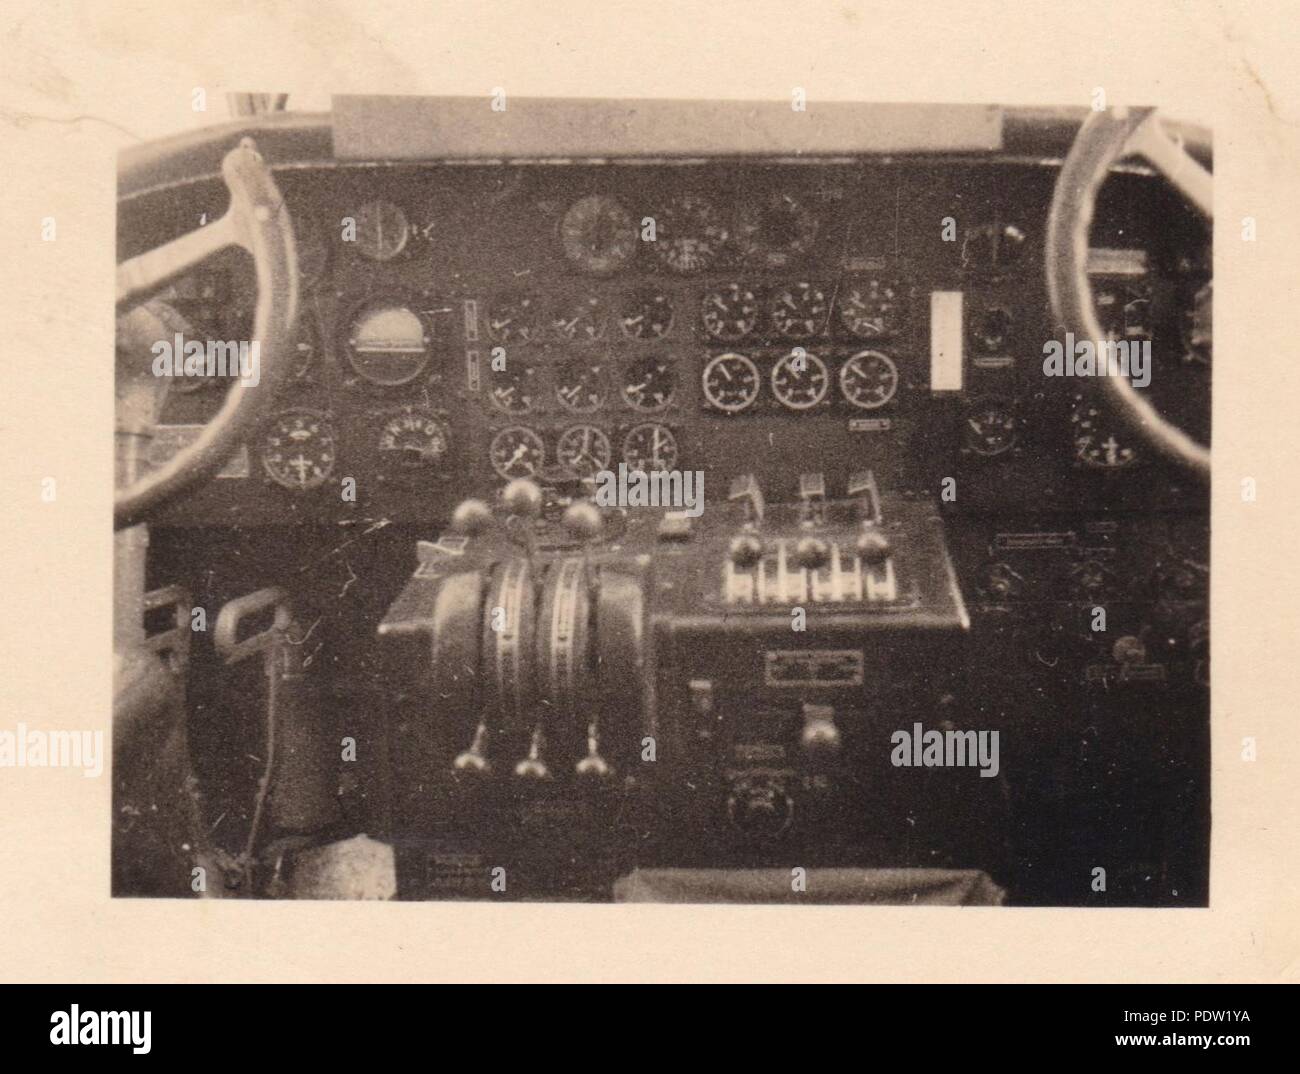 Image from the photo album of Oberfeldwebel Karl Gendner of 1. Staffel, Kampfgeschwader 40: Cockpit controls of a Junkers Ju52/3m transport aircraft of 3./KGzbV 9 in September 1939 during the Poland campaign. Karl Gendner was a pilot with this unit at the time. Stock Photo